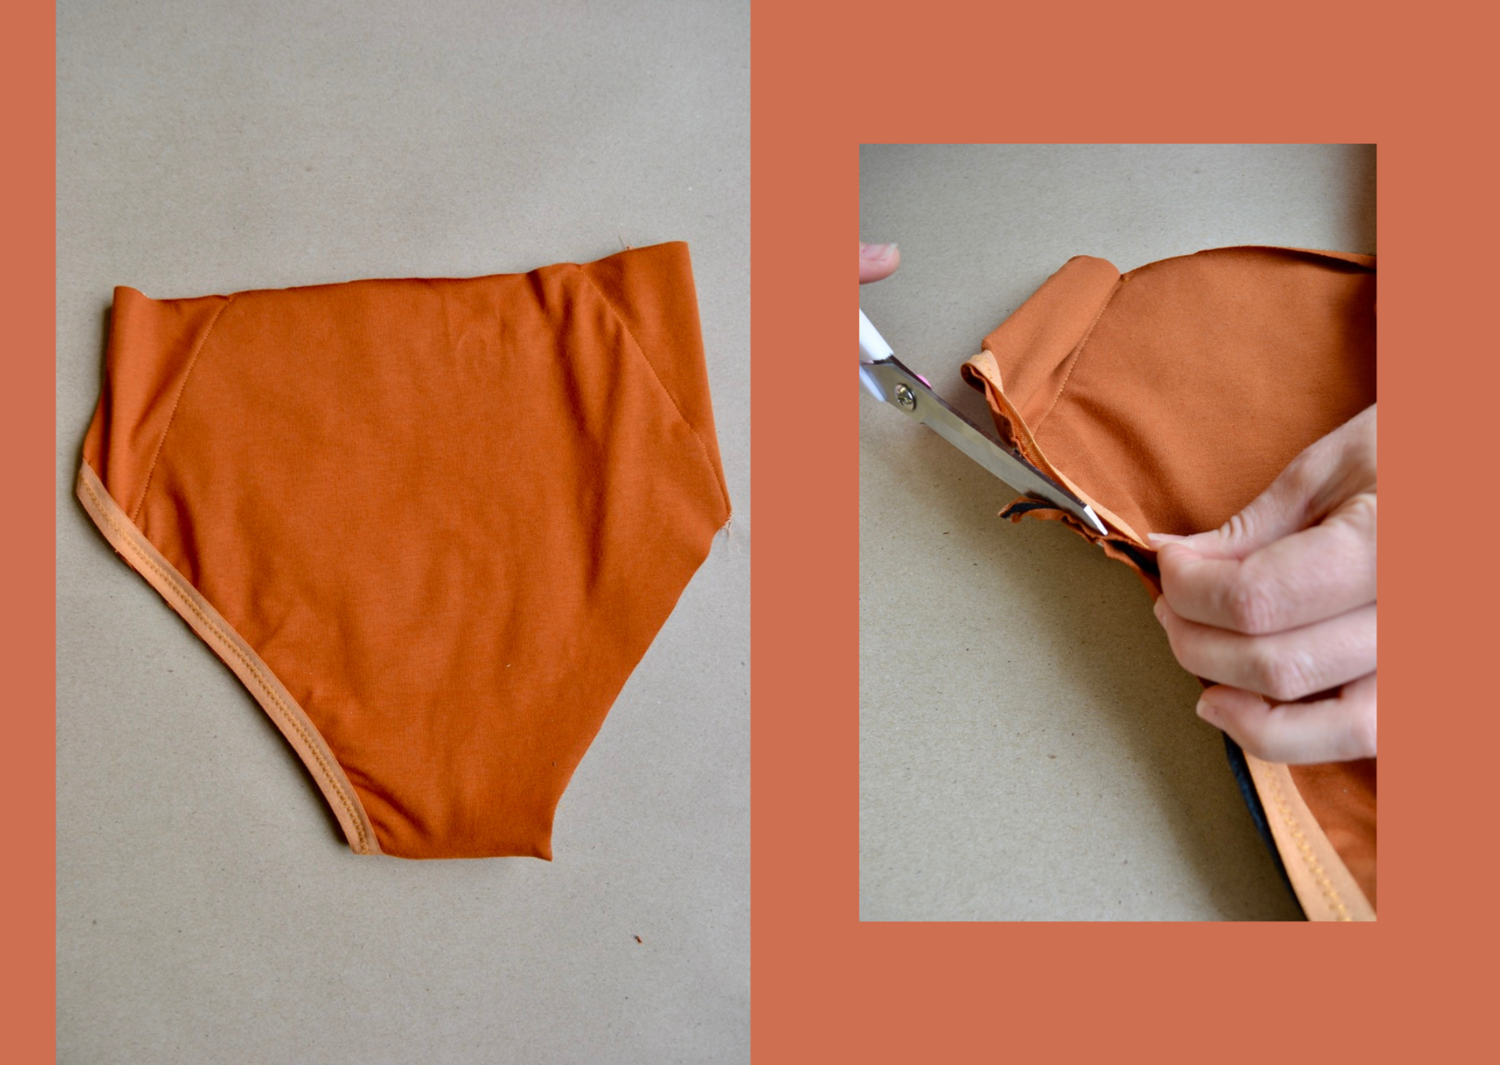 Learn to sew your own period pants! Introducing the Moontide